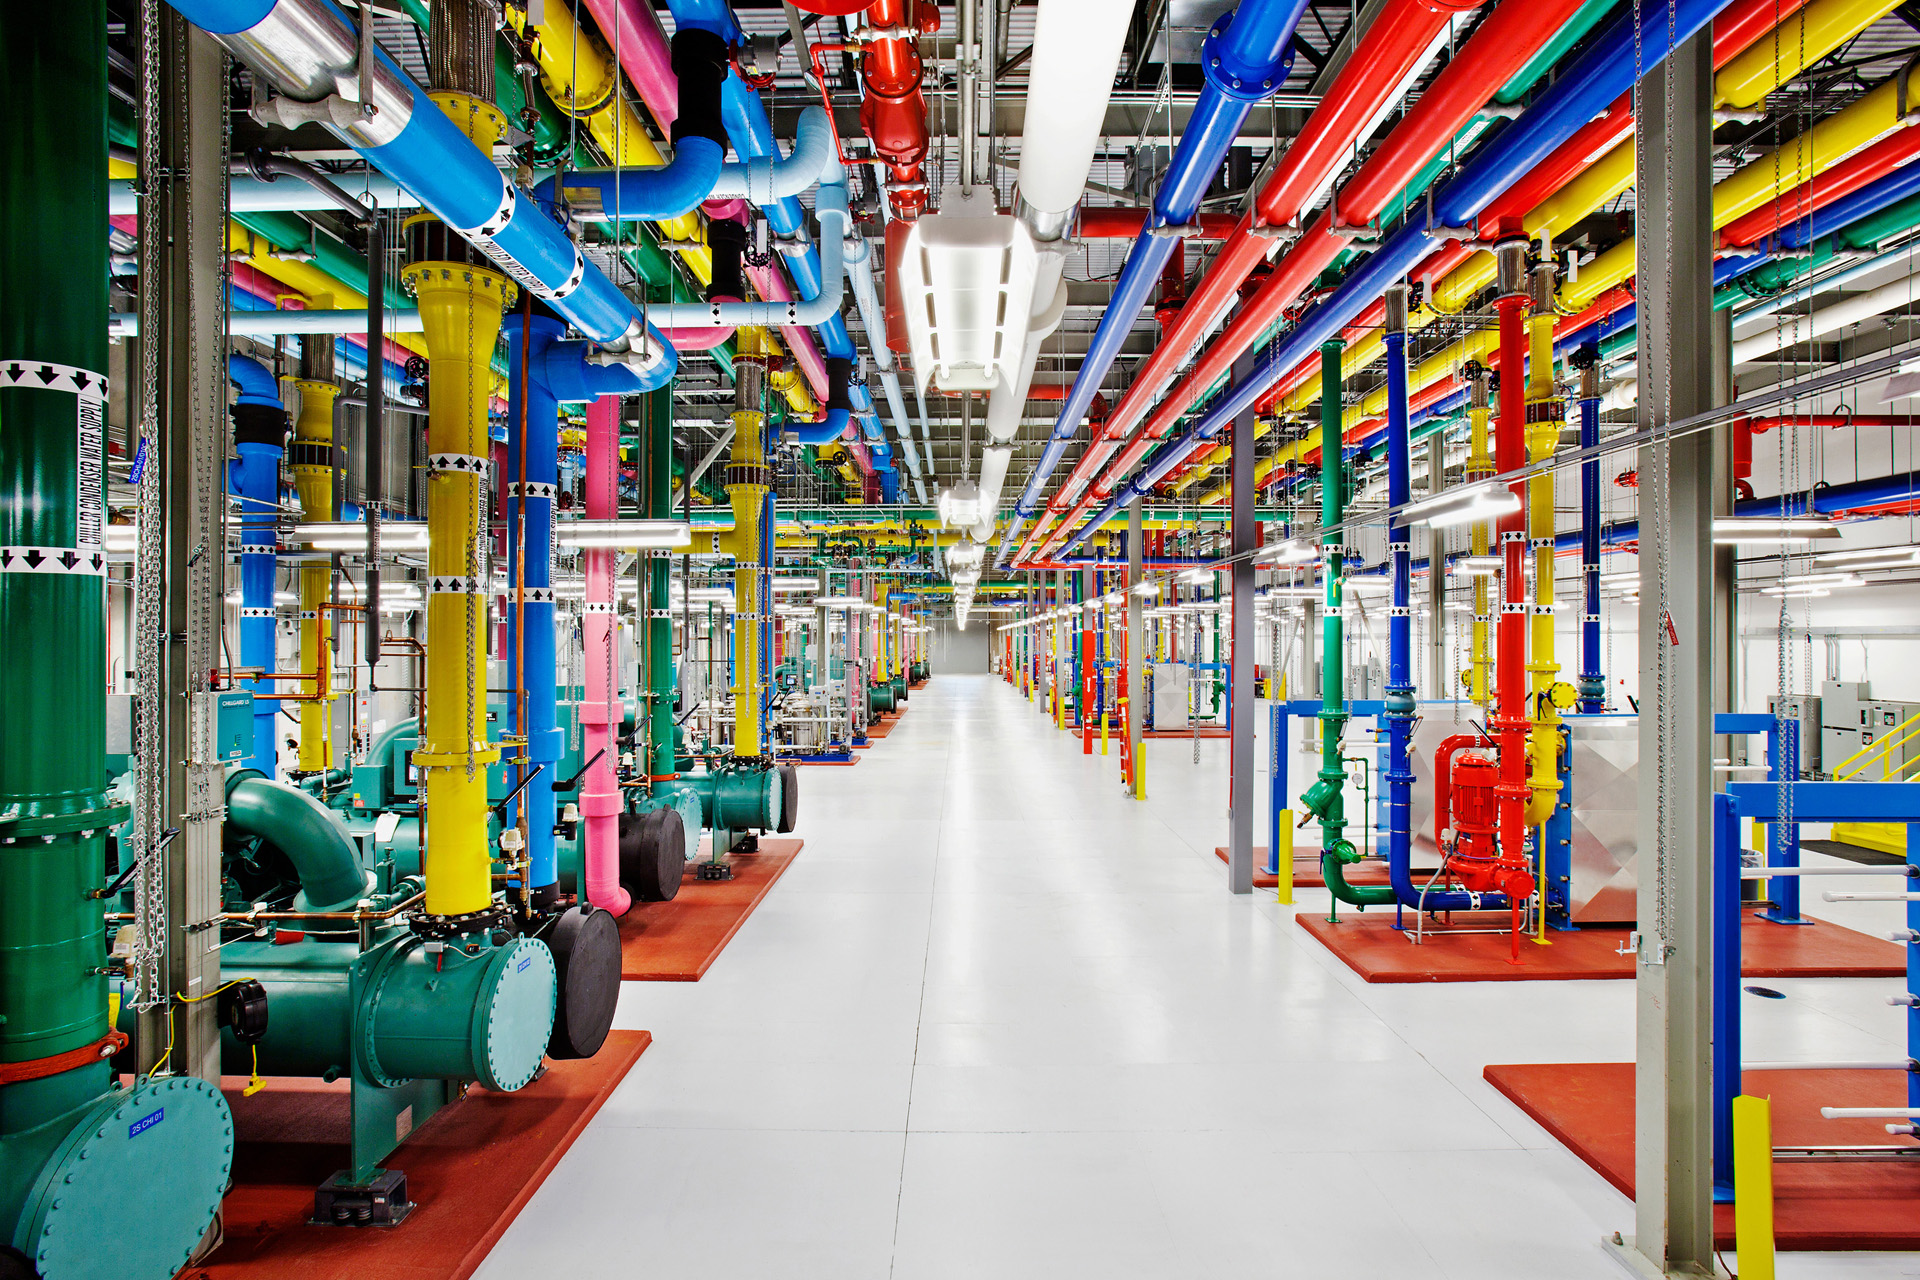 Google secret datacenters filled with a strange colorful theme